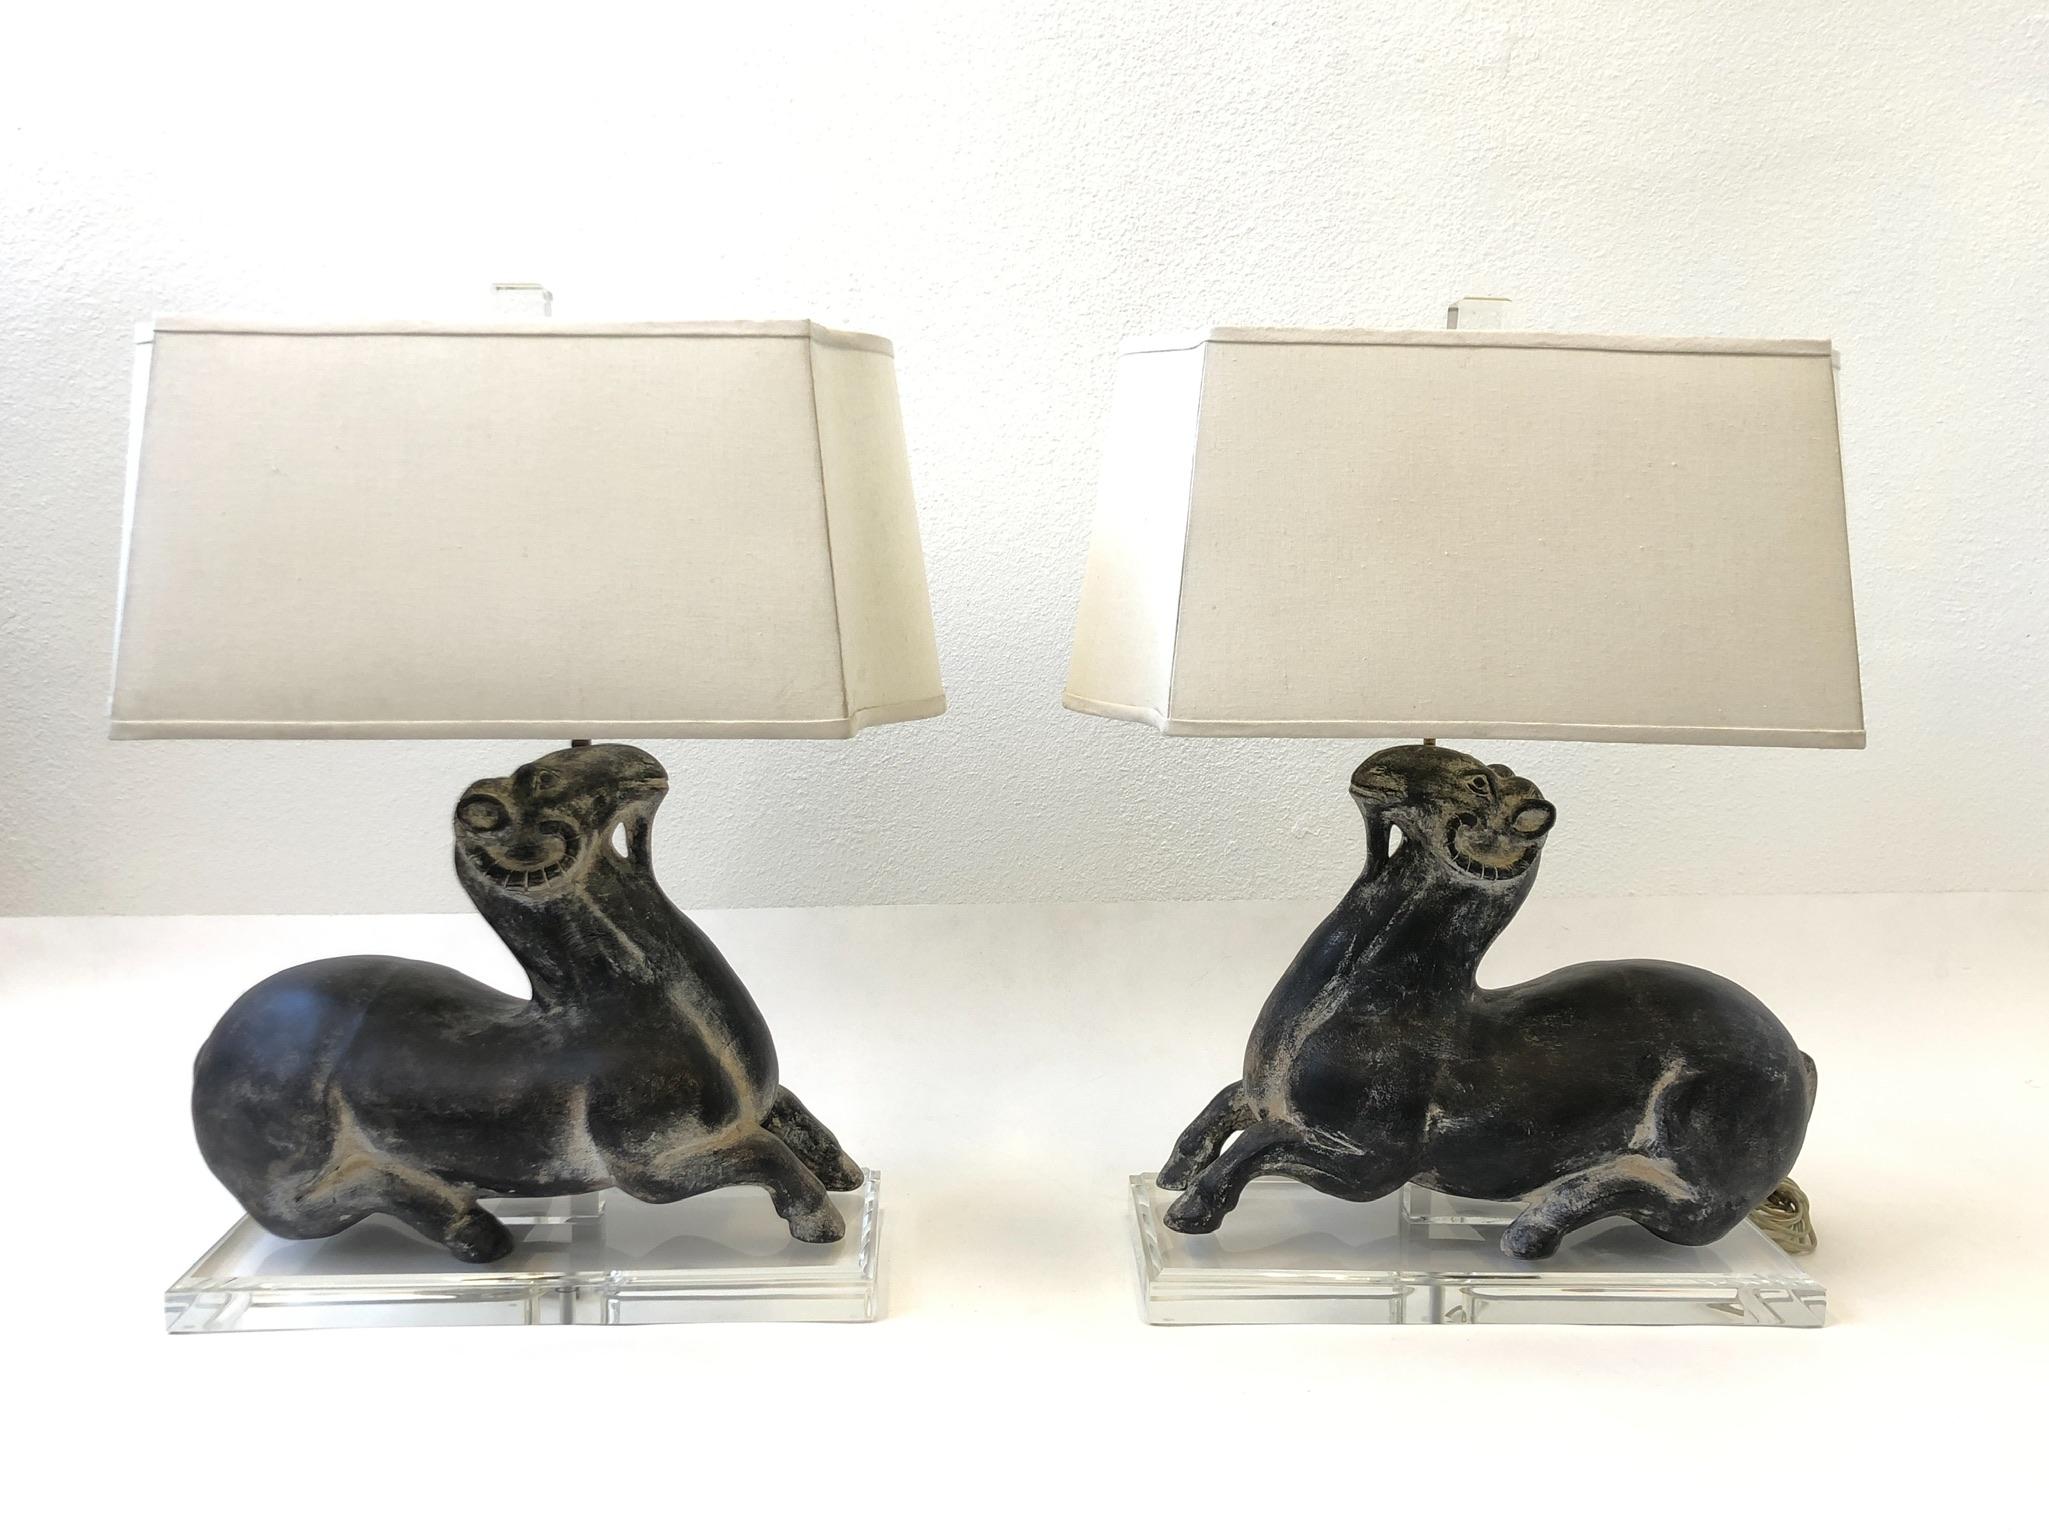 A beautiful pair of hand painted ceramic goats on a Lucite base, table lamps designed by Steve Chase in the 1980s. This were specially designed for a interior design project by Steve Chase. The lamps are in original condition, so they show minor